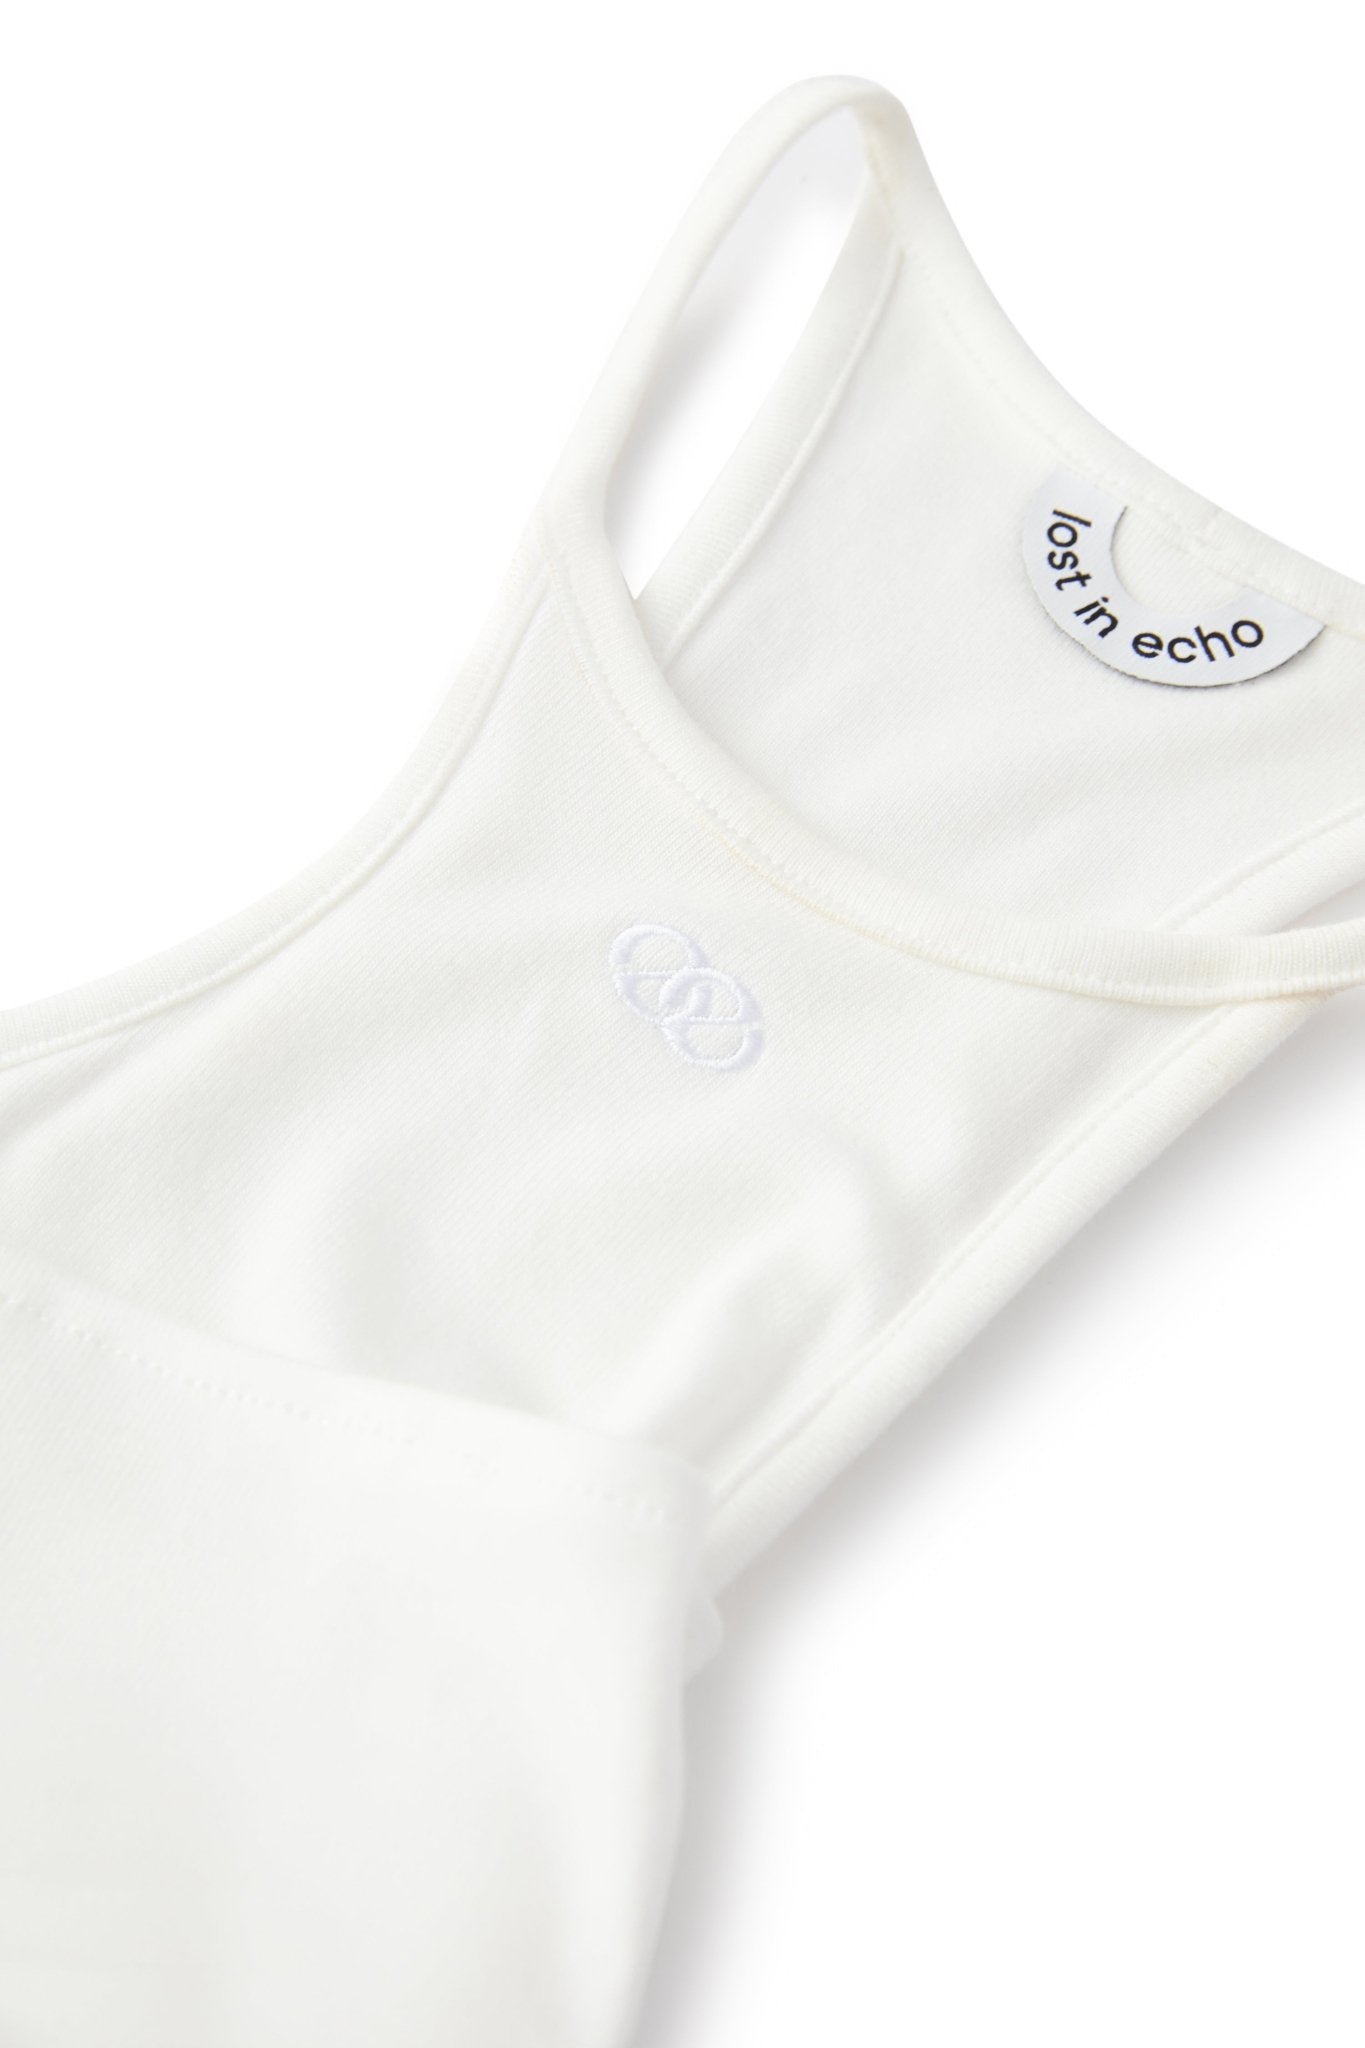 LOST IN ECHO Twisted Racerback Tank Top in White | MADA IN CHINA